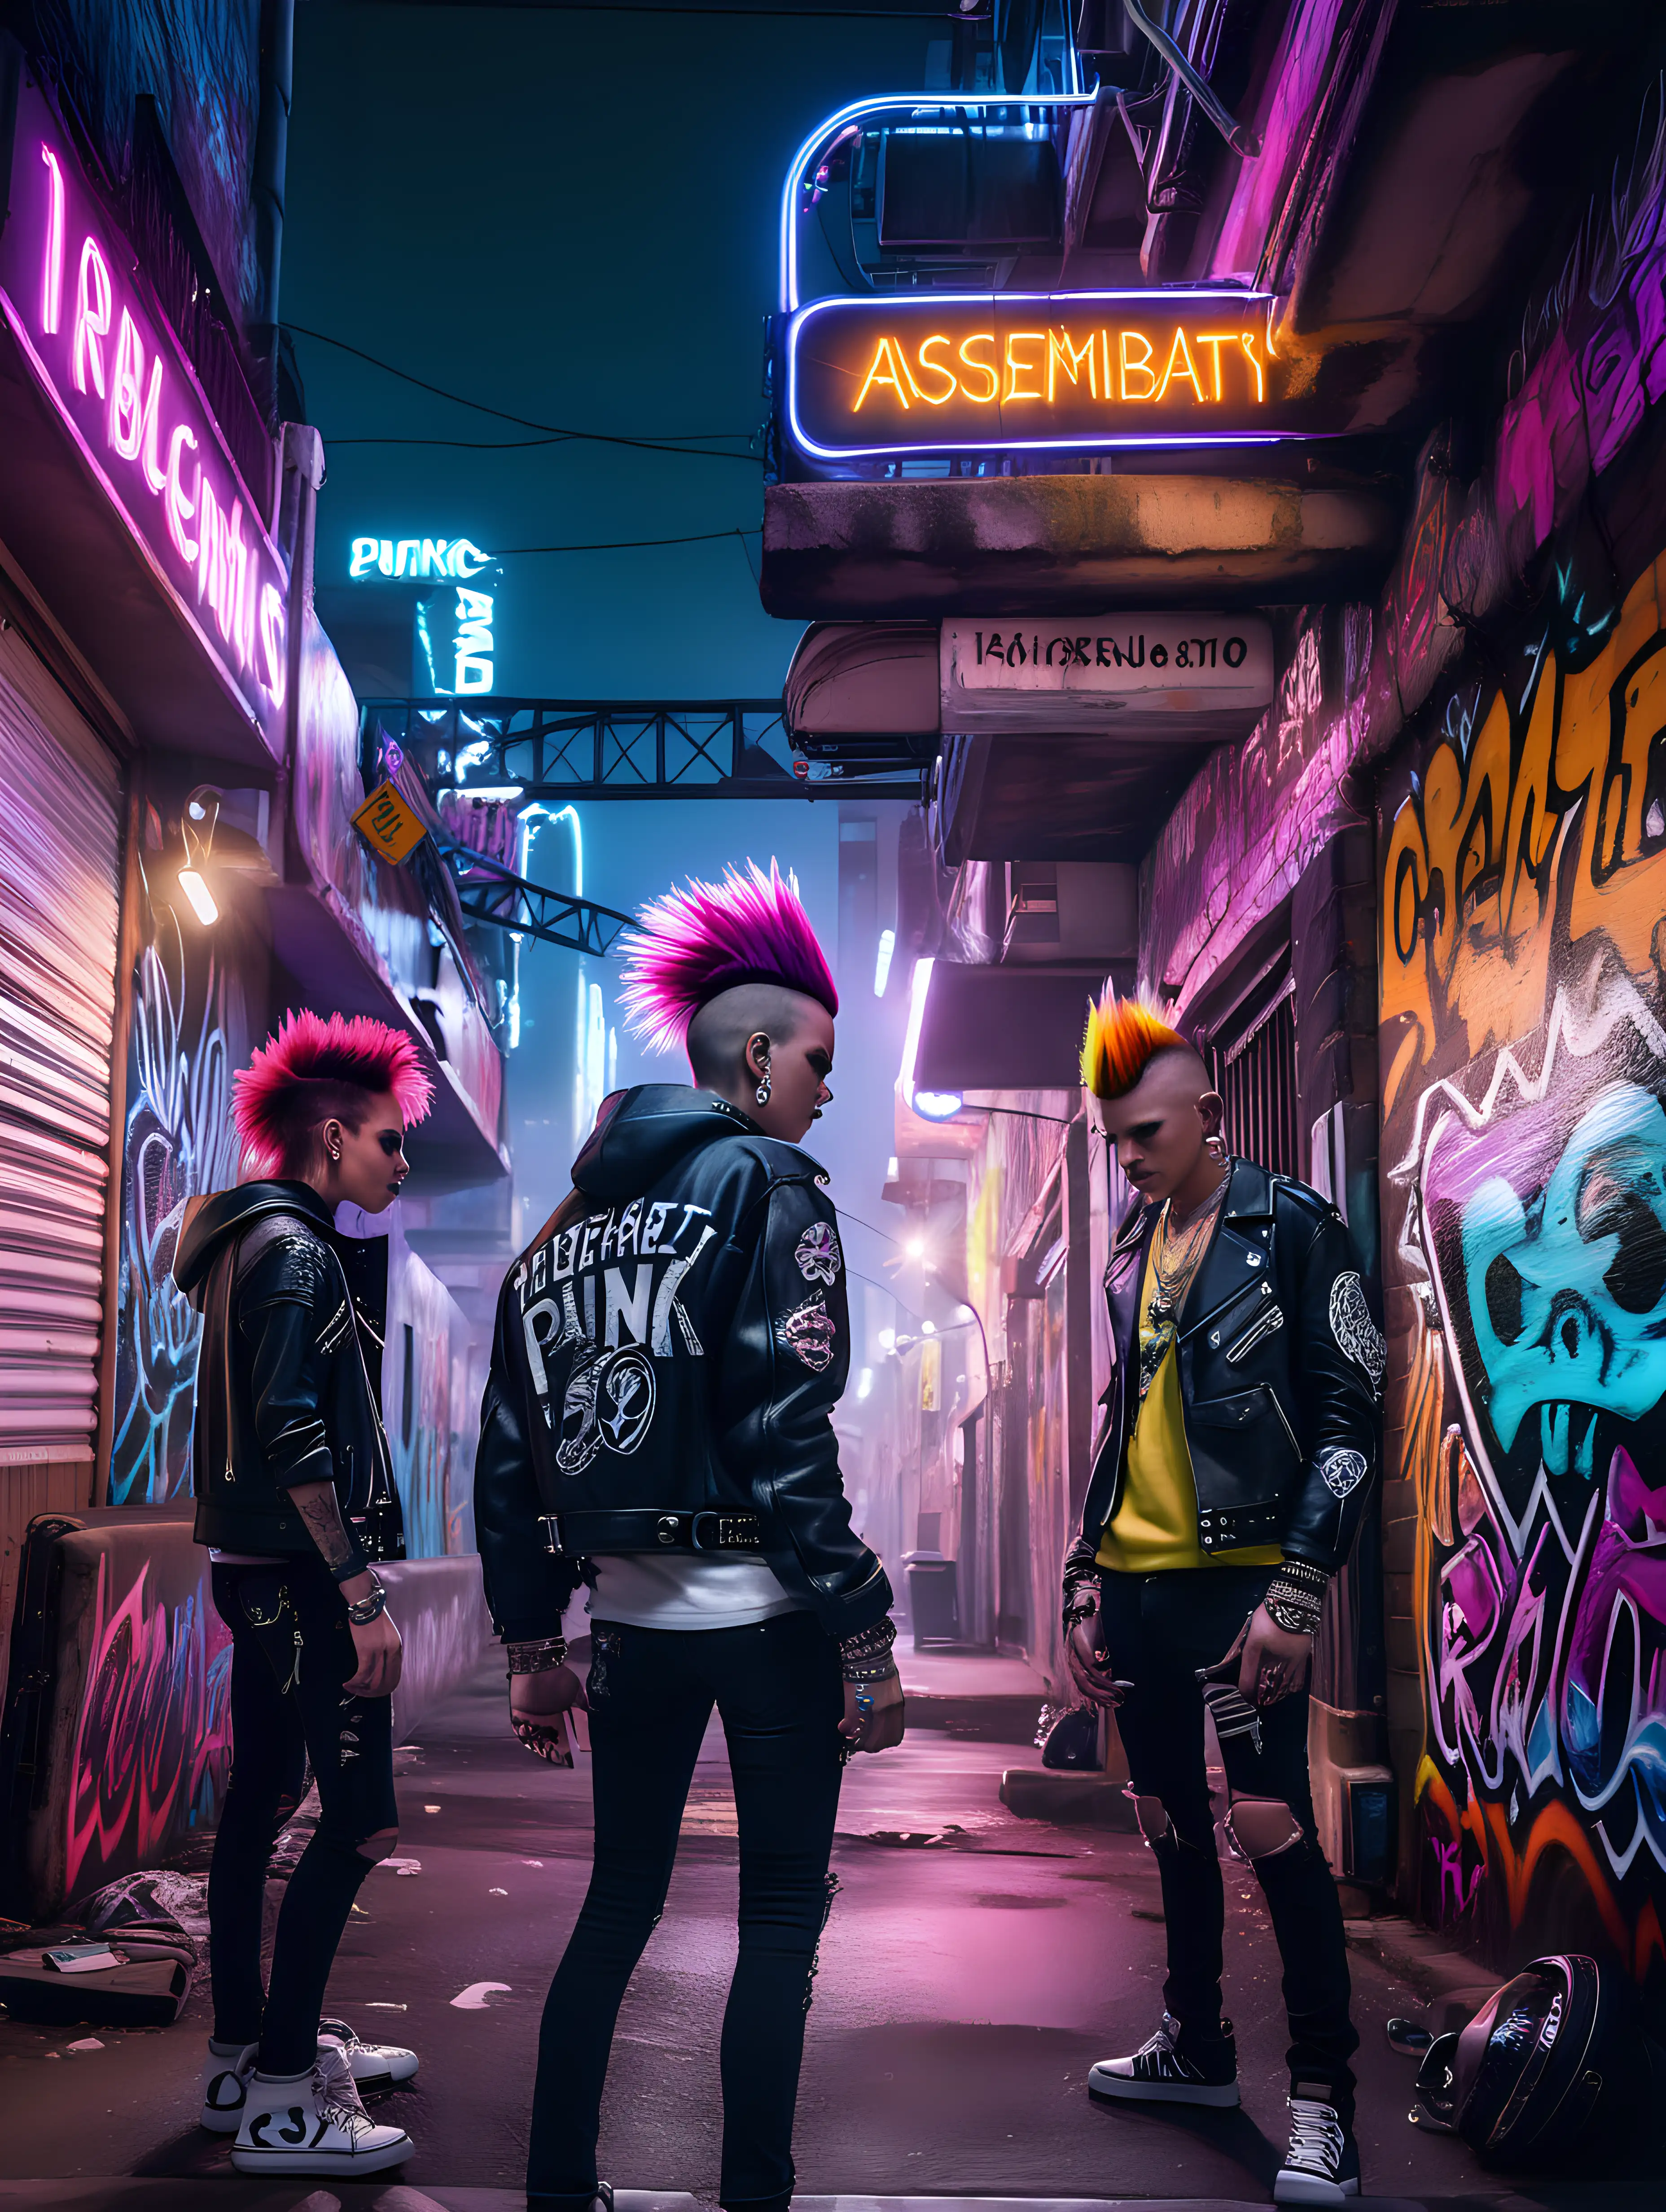 (cinematic lighting), In the depths of the night, a chaotic punk anarchy street comes alive with rebellious energy. Neon lights flicker against graffiti-covered walls, casting an erratic glow on the diverse assembly of punk enthusiasts. The air resonates with the raw sounds of rebellious music, blending with shouts and laughter. Spiked hairstyles, leather jackets, and vibrant tattoos add to the visual cacophony, creating an urban landscape that embodies the spirit of punk anarchy in its most vibrant and unpredictable form, intricate details, hyper realistic photography,--v 5, unreal engine,